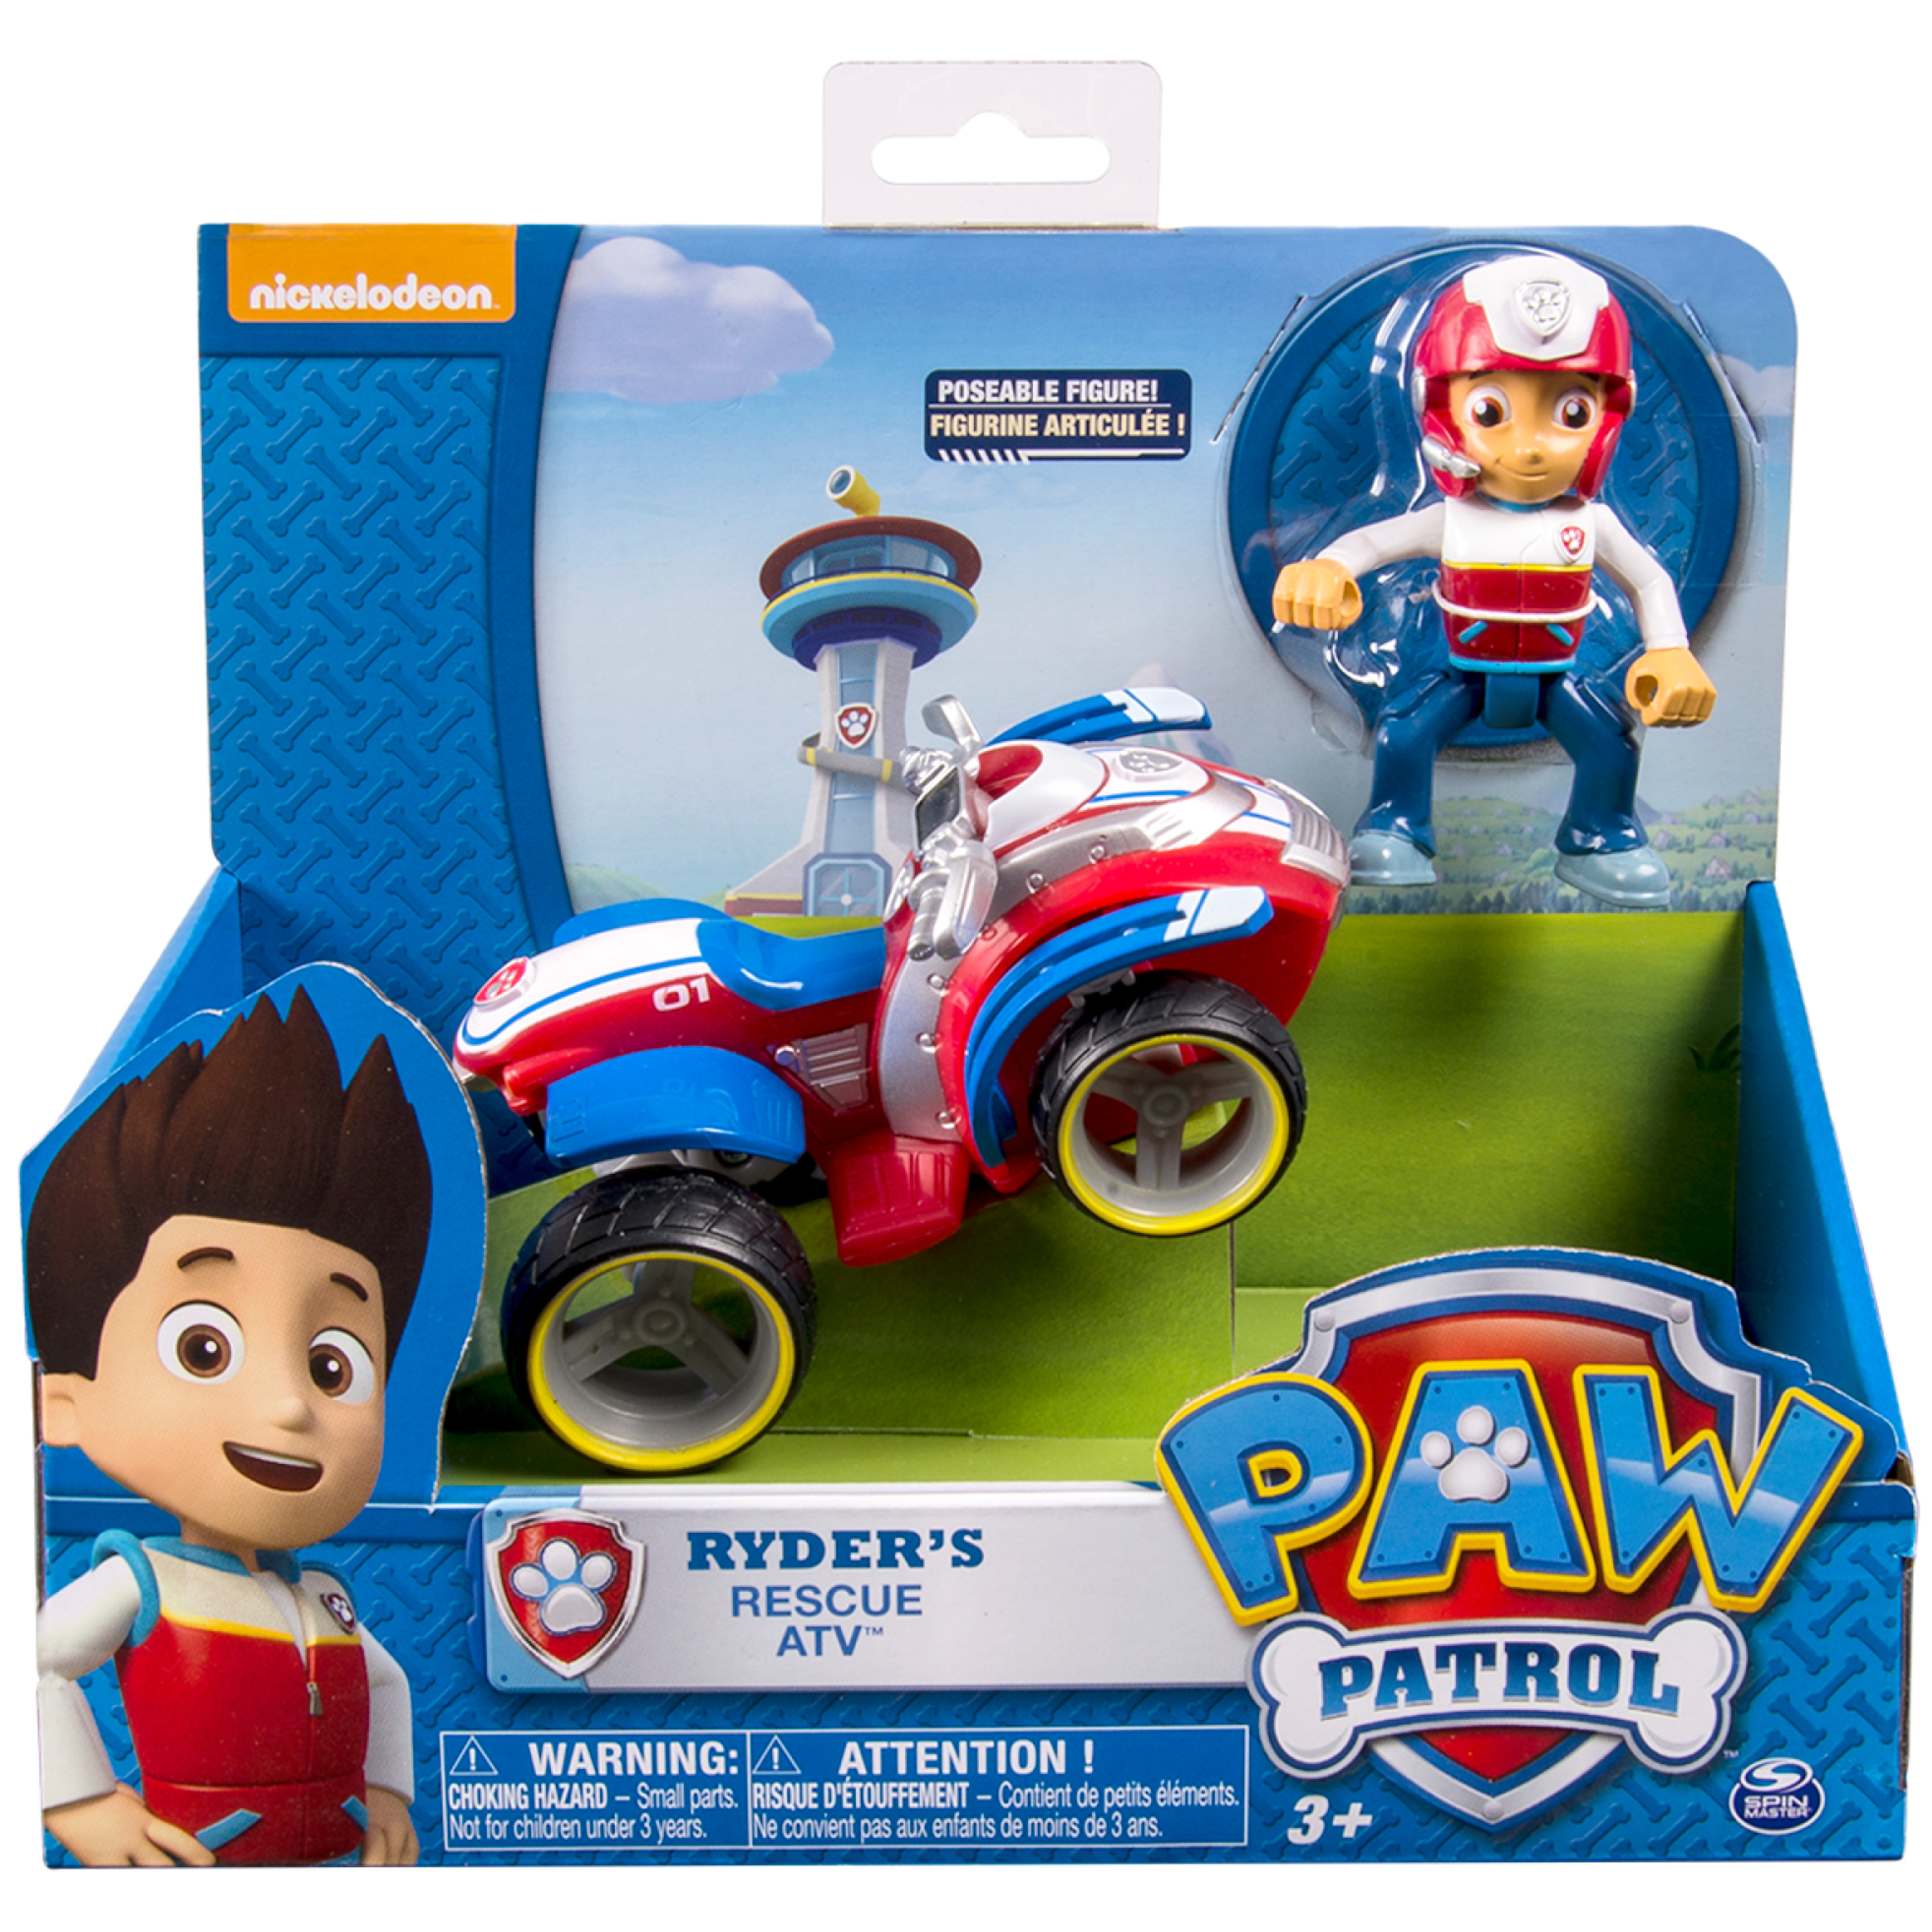 PAW Patrol Ryder's Rescue ATV, Vehicle and Figure, For Ages 3 and up - image 6 of 6